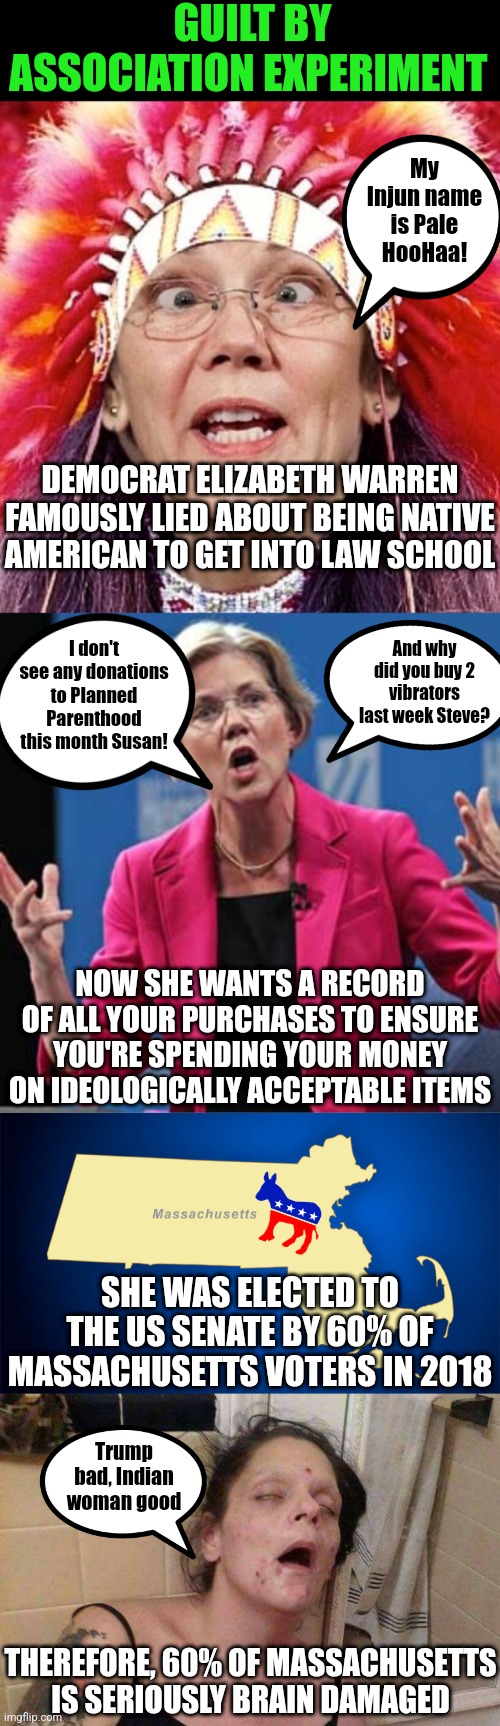 If the shoe fits.... | GUILT BY ASSOCIATION EXPERIMENT; My Injun name is Pale HooHaa! DEMOCRAT ELIZABETH WARREN FAMOUSLY LIED ABOUT BEING NATIVE AMERICAN TO GET INTO LAW SCHOOL; I don't see any donations to Planned Parenthood this month Susan! And why did you buy 2 vibrators last week Steve? NOW SHE WANTS A RECORD OF ALL YOUR PURCHASES TO ENSURE YOU'RE SPENDING YOUR MONEY ON IDEOLOGICALLY ACCEPTABLE ITEMS; SHE WAS ELECTED TO THE US SENATE BY 60% OF MASSACHUSETTS VOTERS IN 2018; Trump bad, Indian woman good; THEREFORE, 60% OF MASSACHUSETTS IS SERIOUSLY BRAIN DAMAGED | image tagged in elizabeth warren,massachusetts,junkie,liberal logic,stupid people,hypocrisy | made w/ Imgflip meme maker